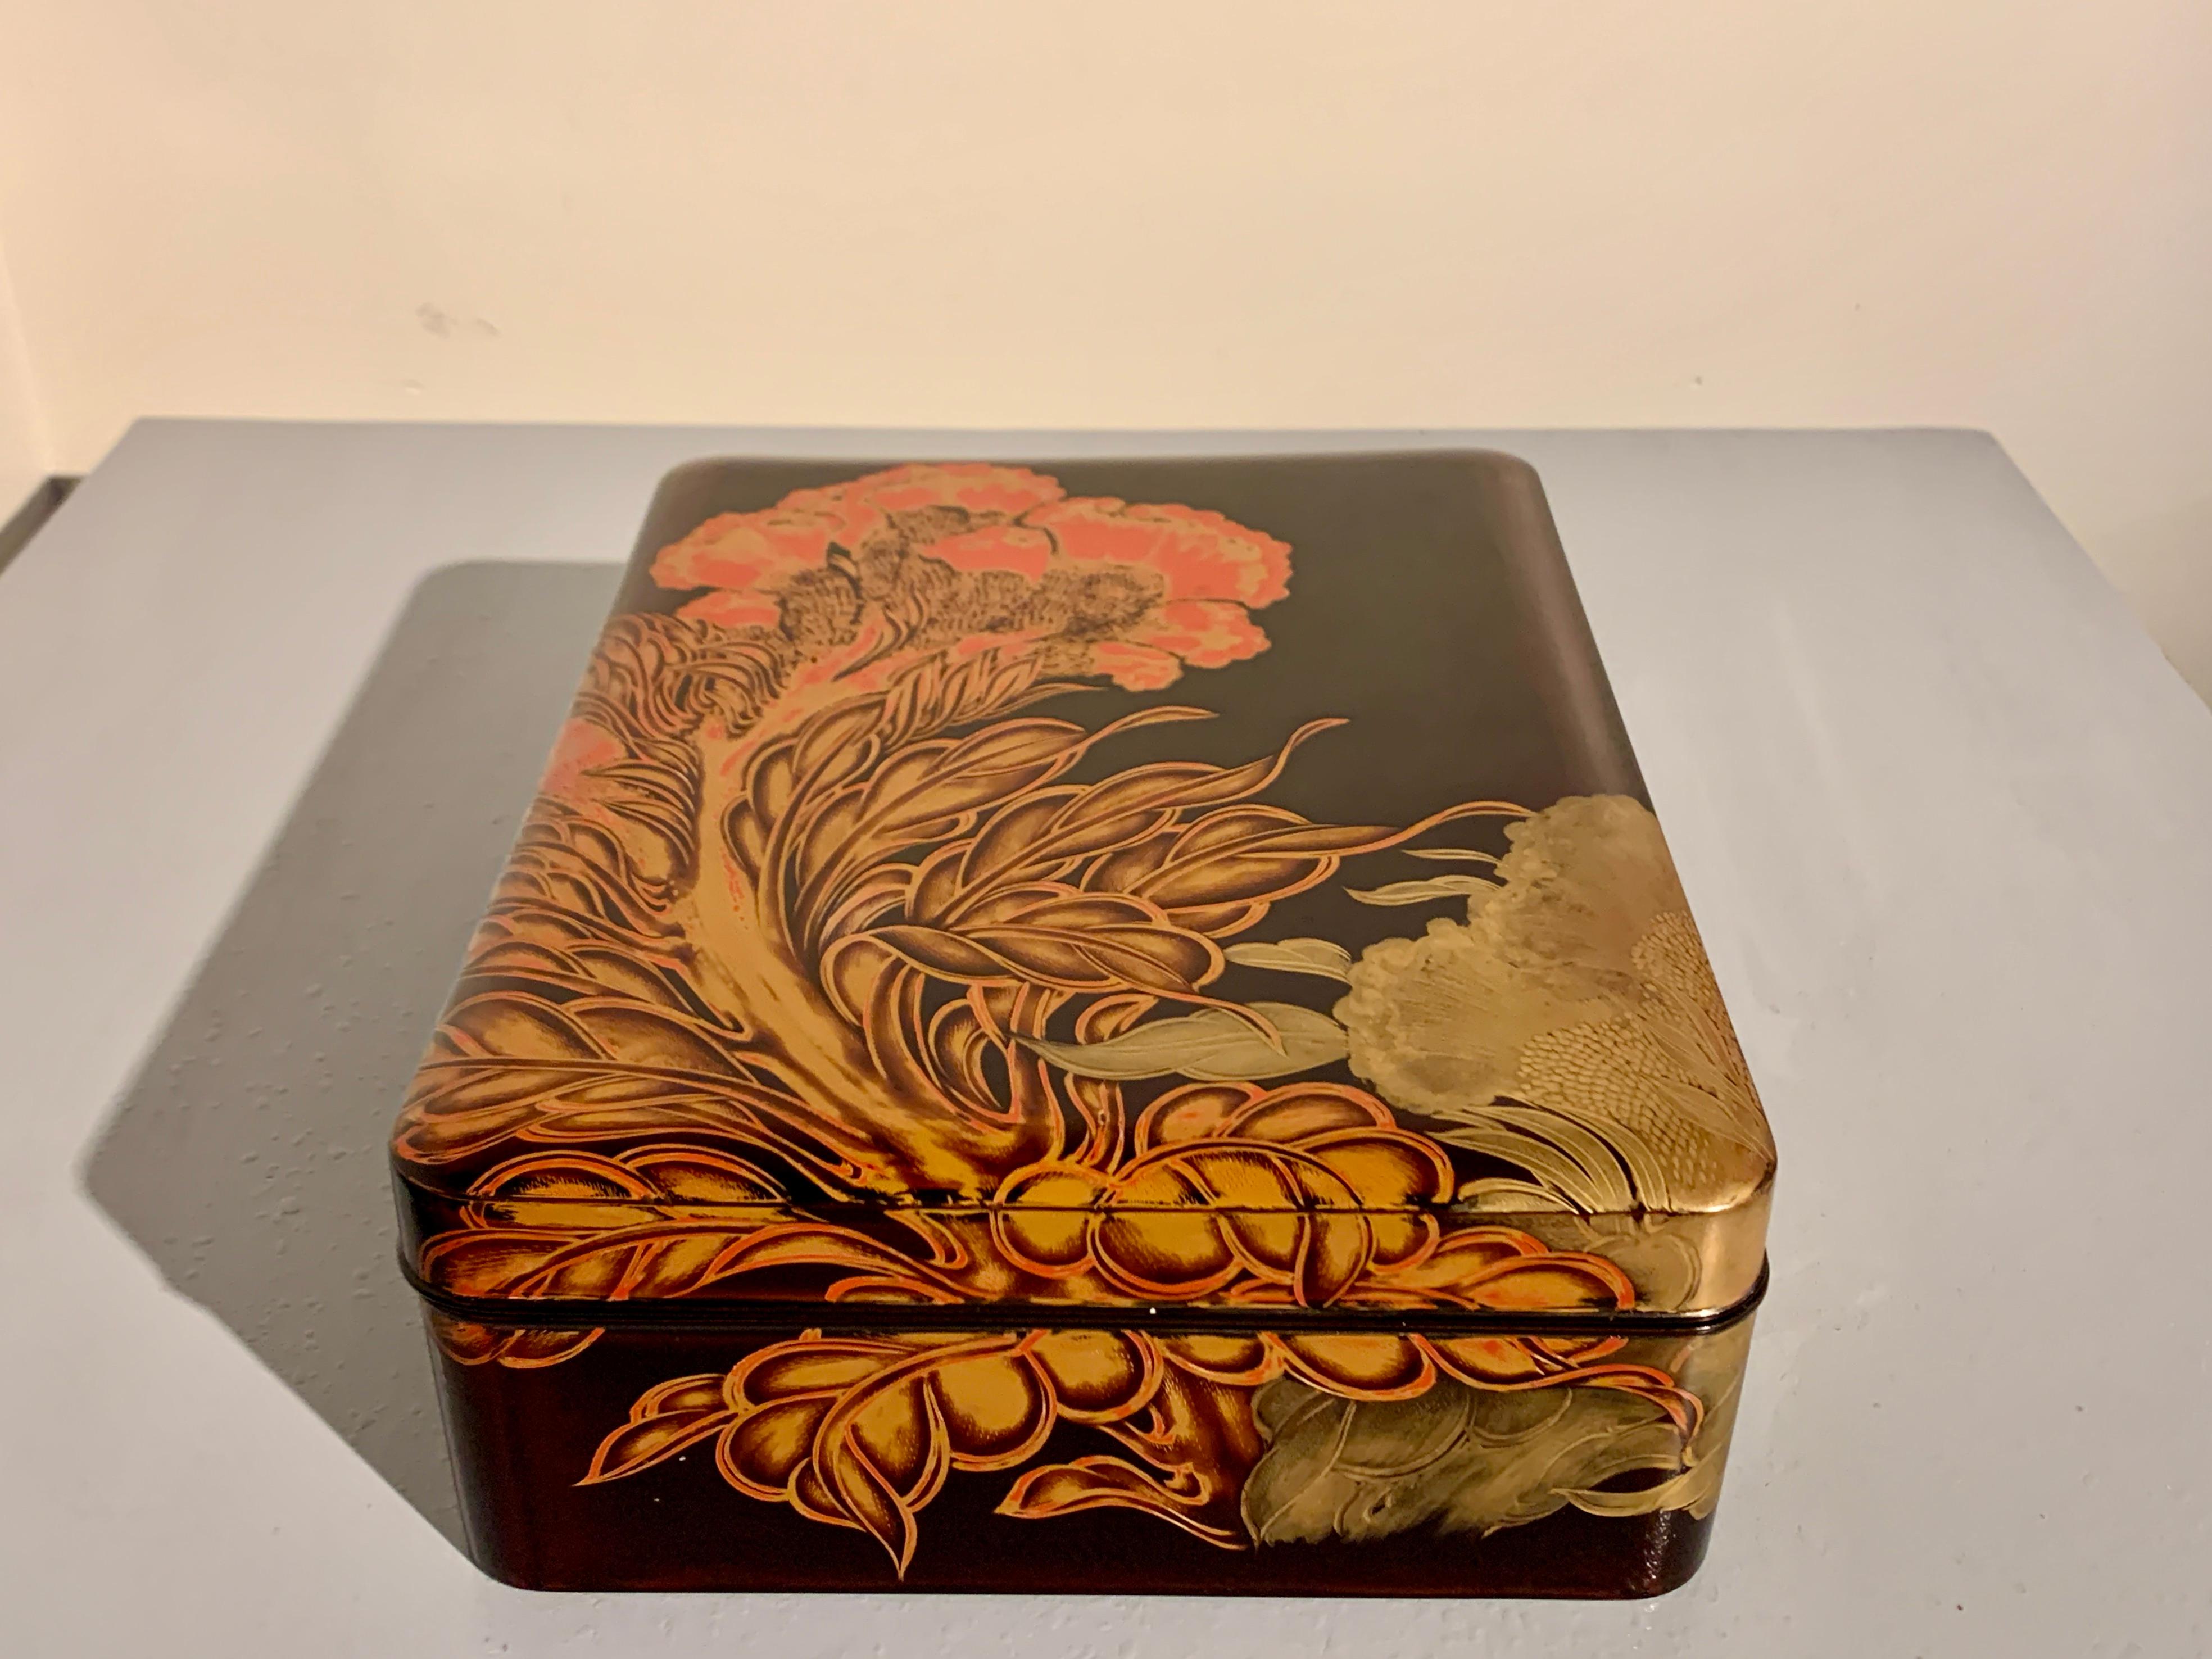 A large and boldly decorated Japanese lacquer document box, ryoshibako, Showa Period, circa 1960, Japan.

The large rectangular box for storing papers of documents is known as a ryoshibako. This lacquer ryoshibako features a rounded corners and a